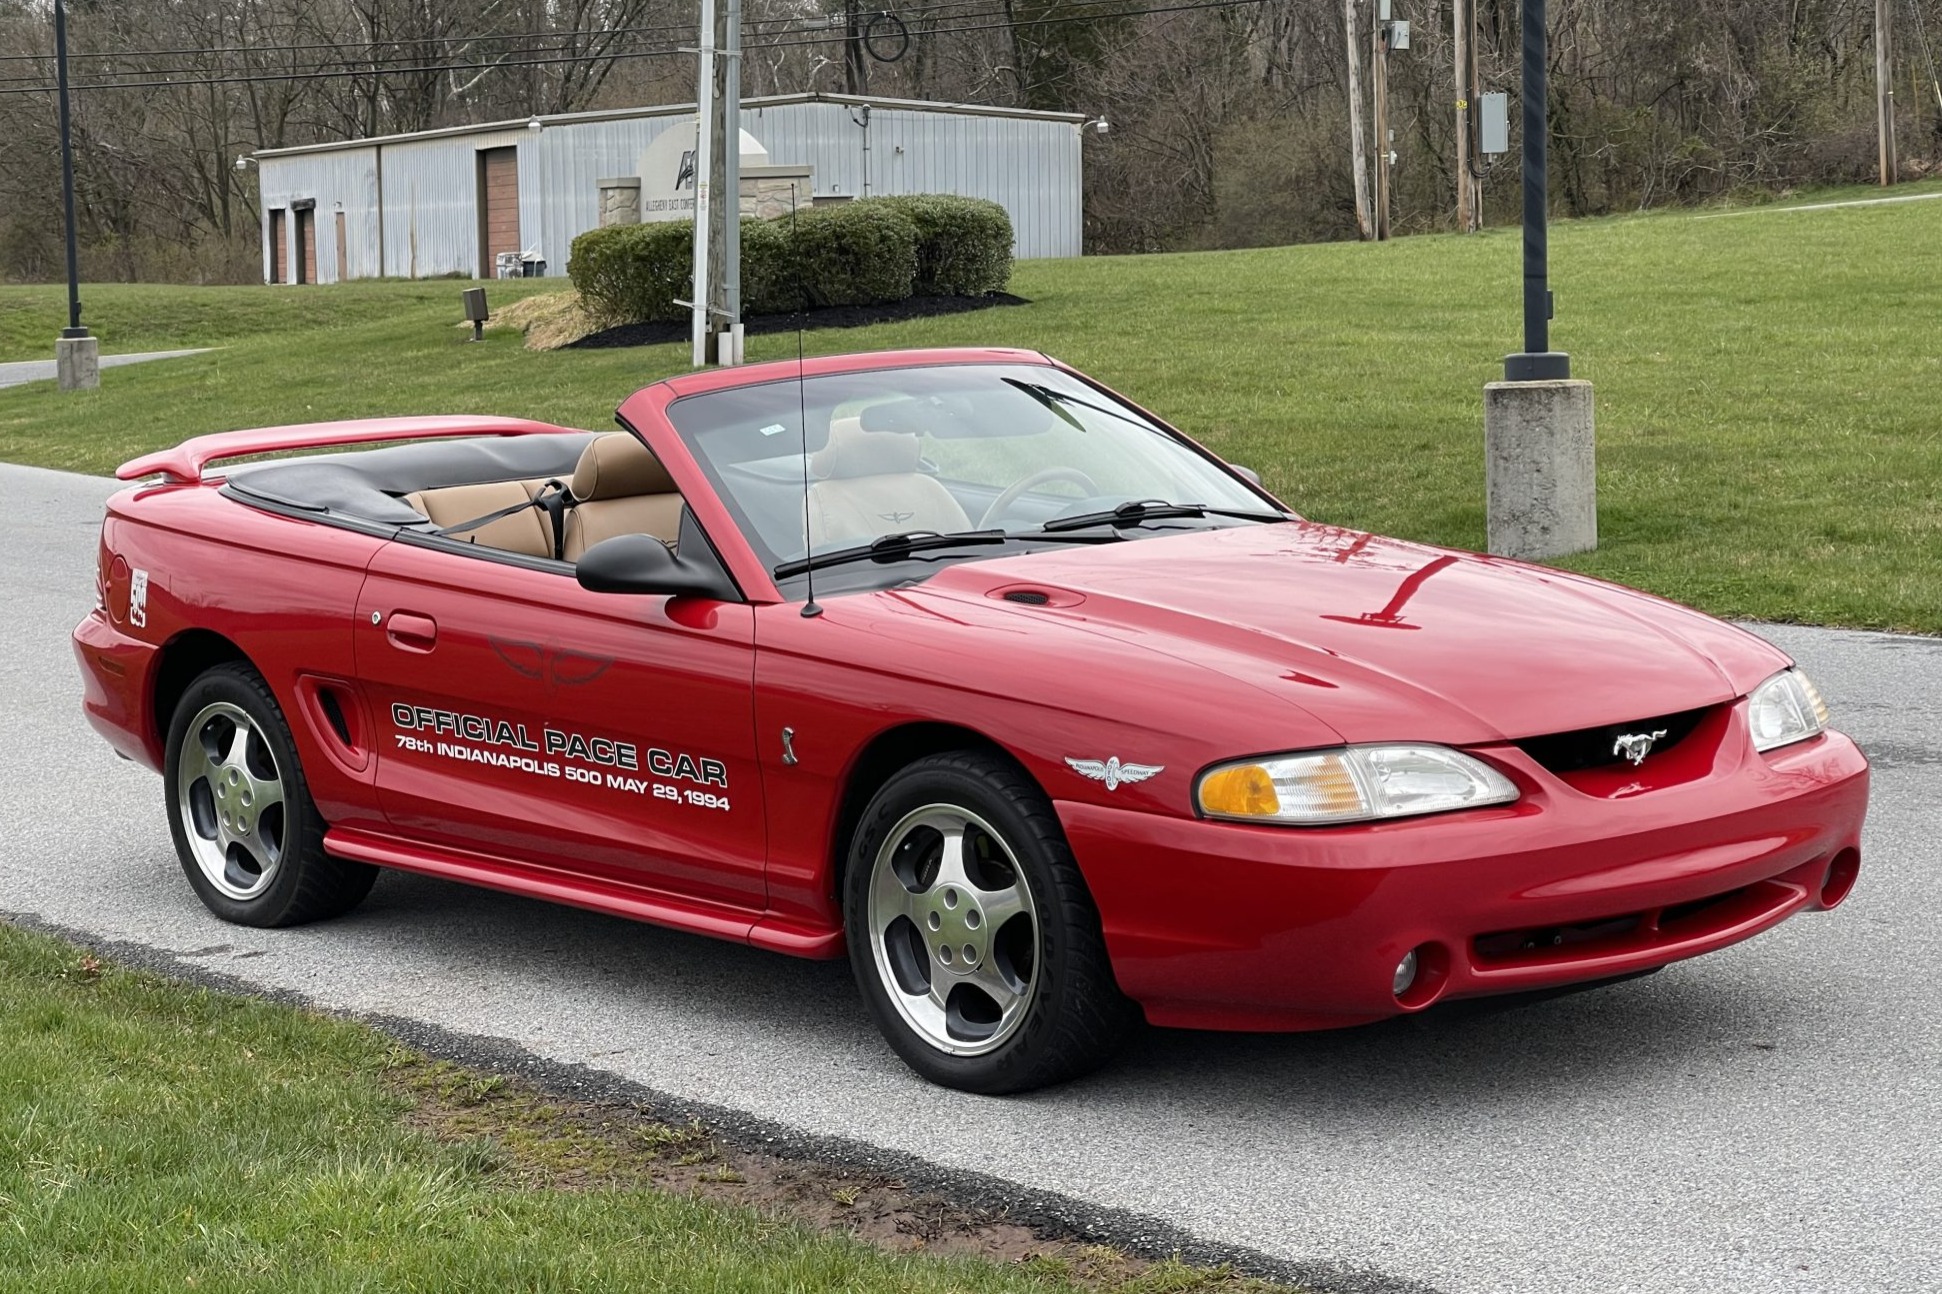 Used 5k-Mile 1994 Ford Mustang SVT Cobra Convertible Pace Car 5-Speed Review